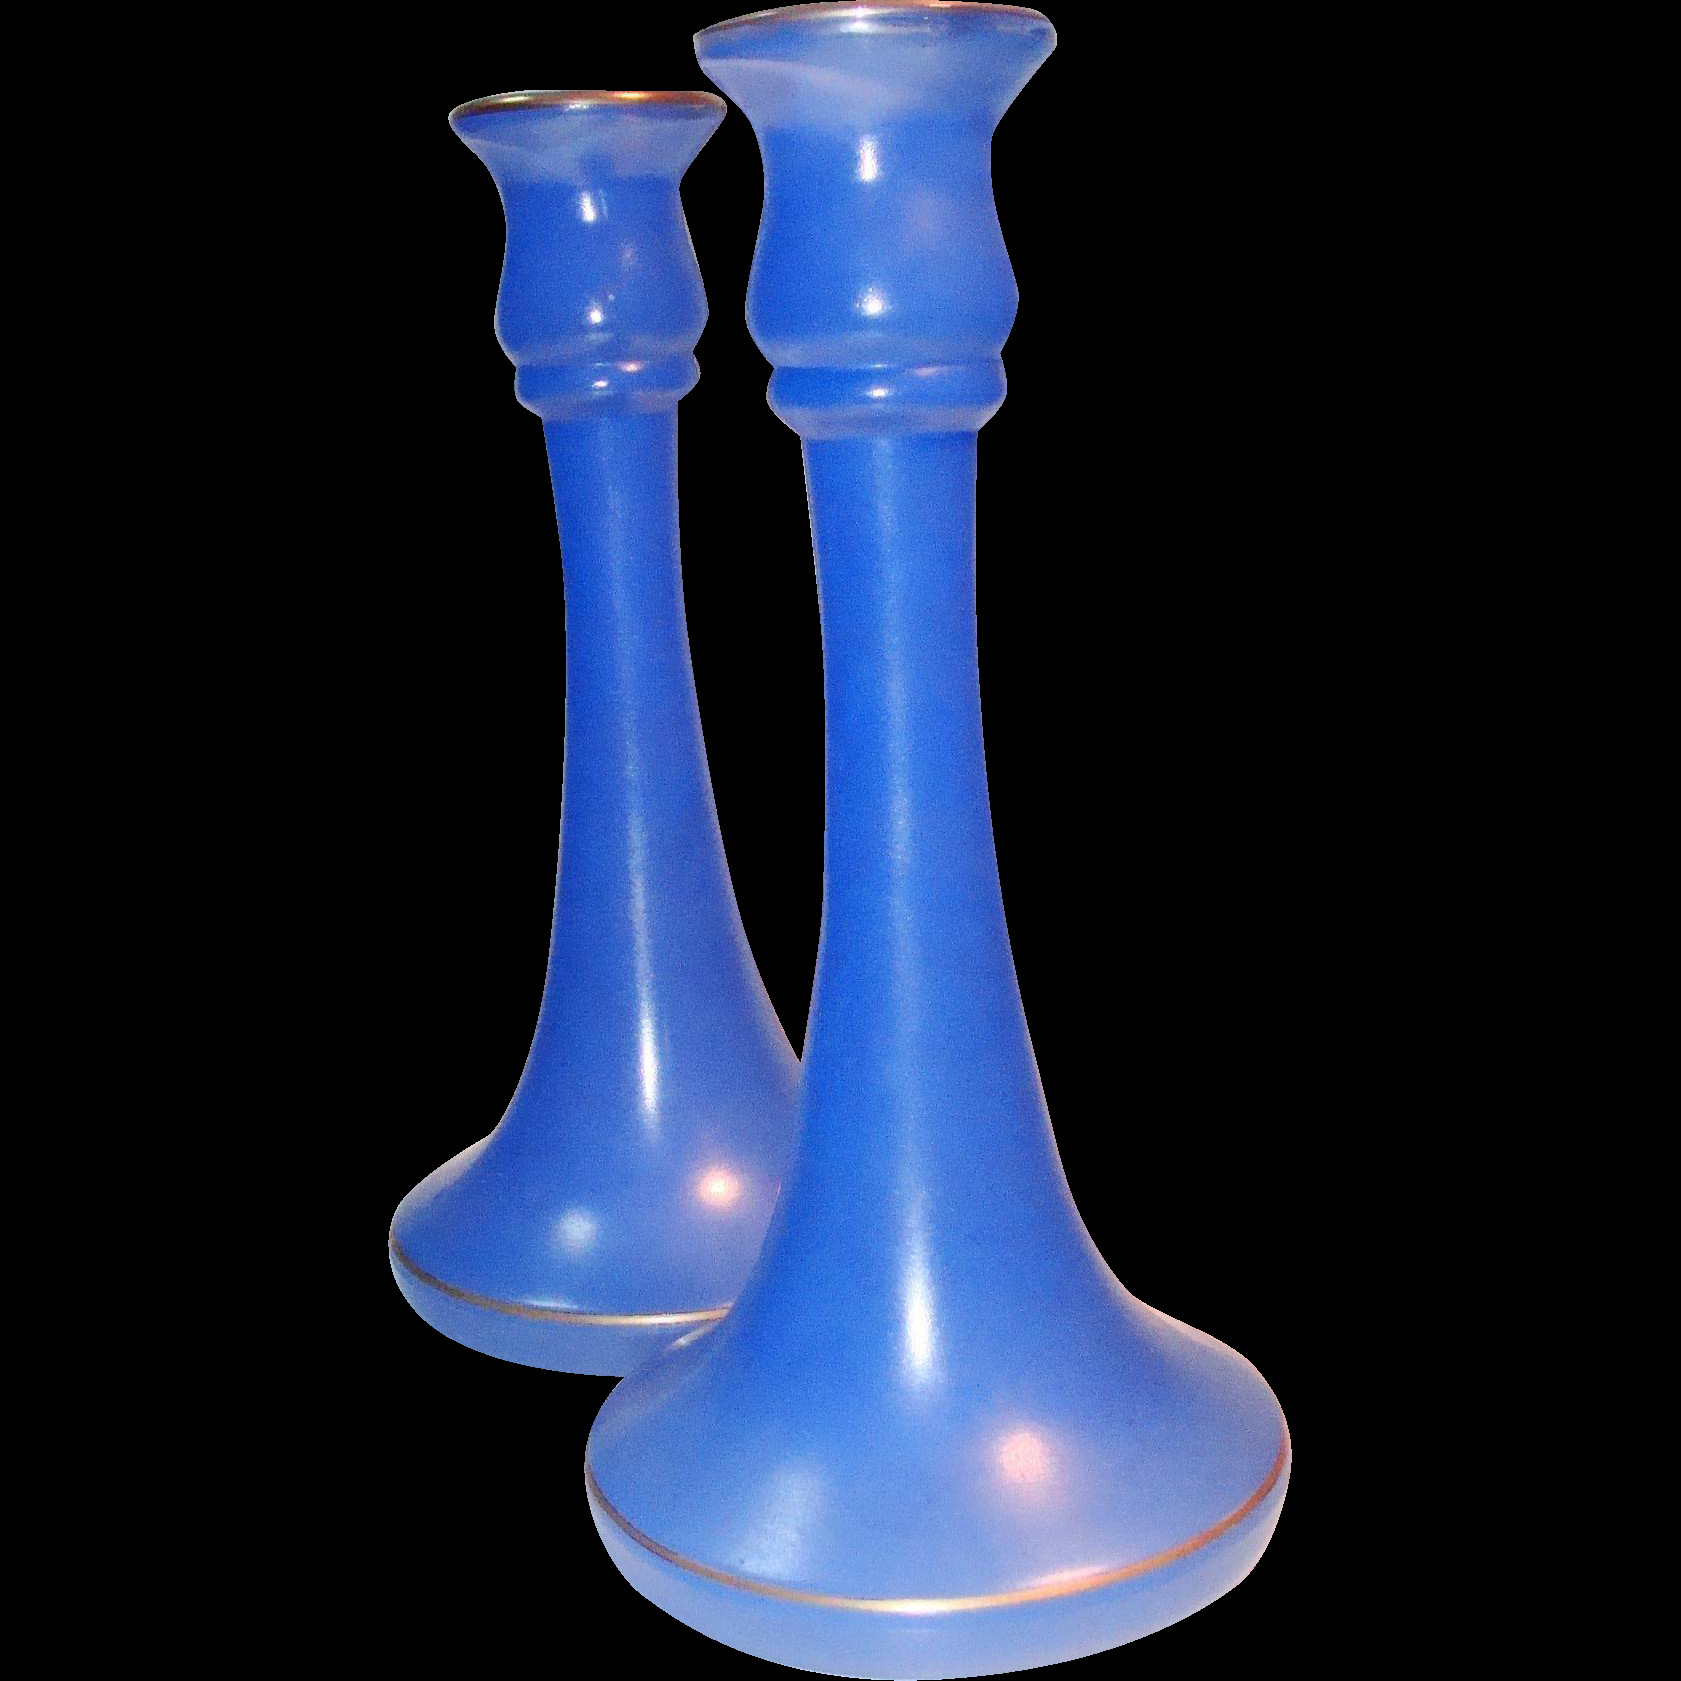 18 Spectacular Old Blue Glass Vases 2024 free download old blue glass vases of cool blue frosted glass candlesticks pair 9 tall with cool blue glass candlesticks a pair to use on your table to make you at least feel cool in summer